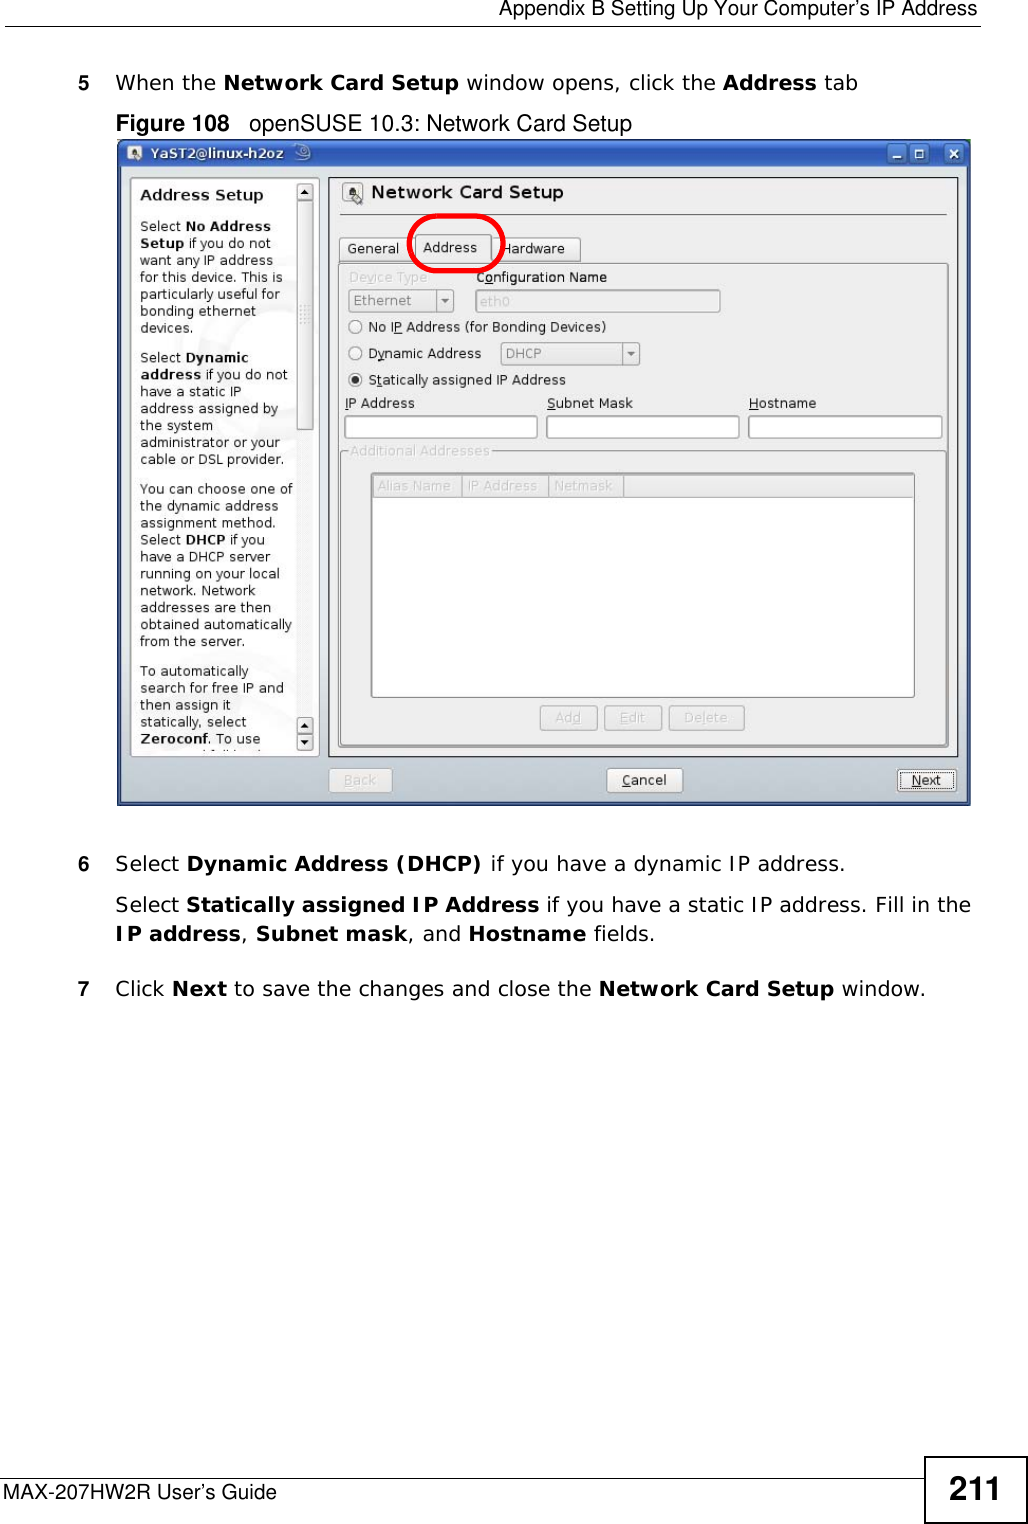  Appendix B Setting Up Your Computer’s IP AddressMAX-207HW2R User’s Guide 2115When the Network Card Setup window opens, click the Address tabFigure 108   openSUSE 10.3: Network Card Setup6Select Dynamic Address (DHCP) if you have a dynamic IP address.Select Statically assigned IP Address if you have a static IP address. Fill in the IP address, Subnet mask, and Hostname fields.7Click Next to save the changes and close the Network Card Setup window. 